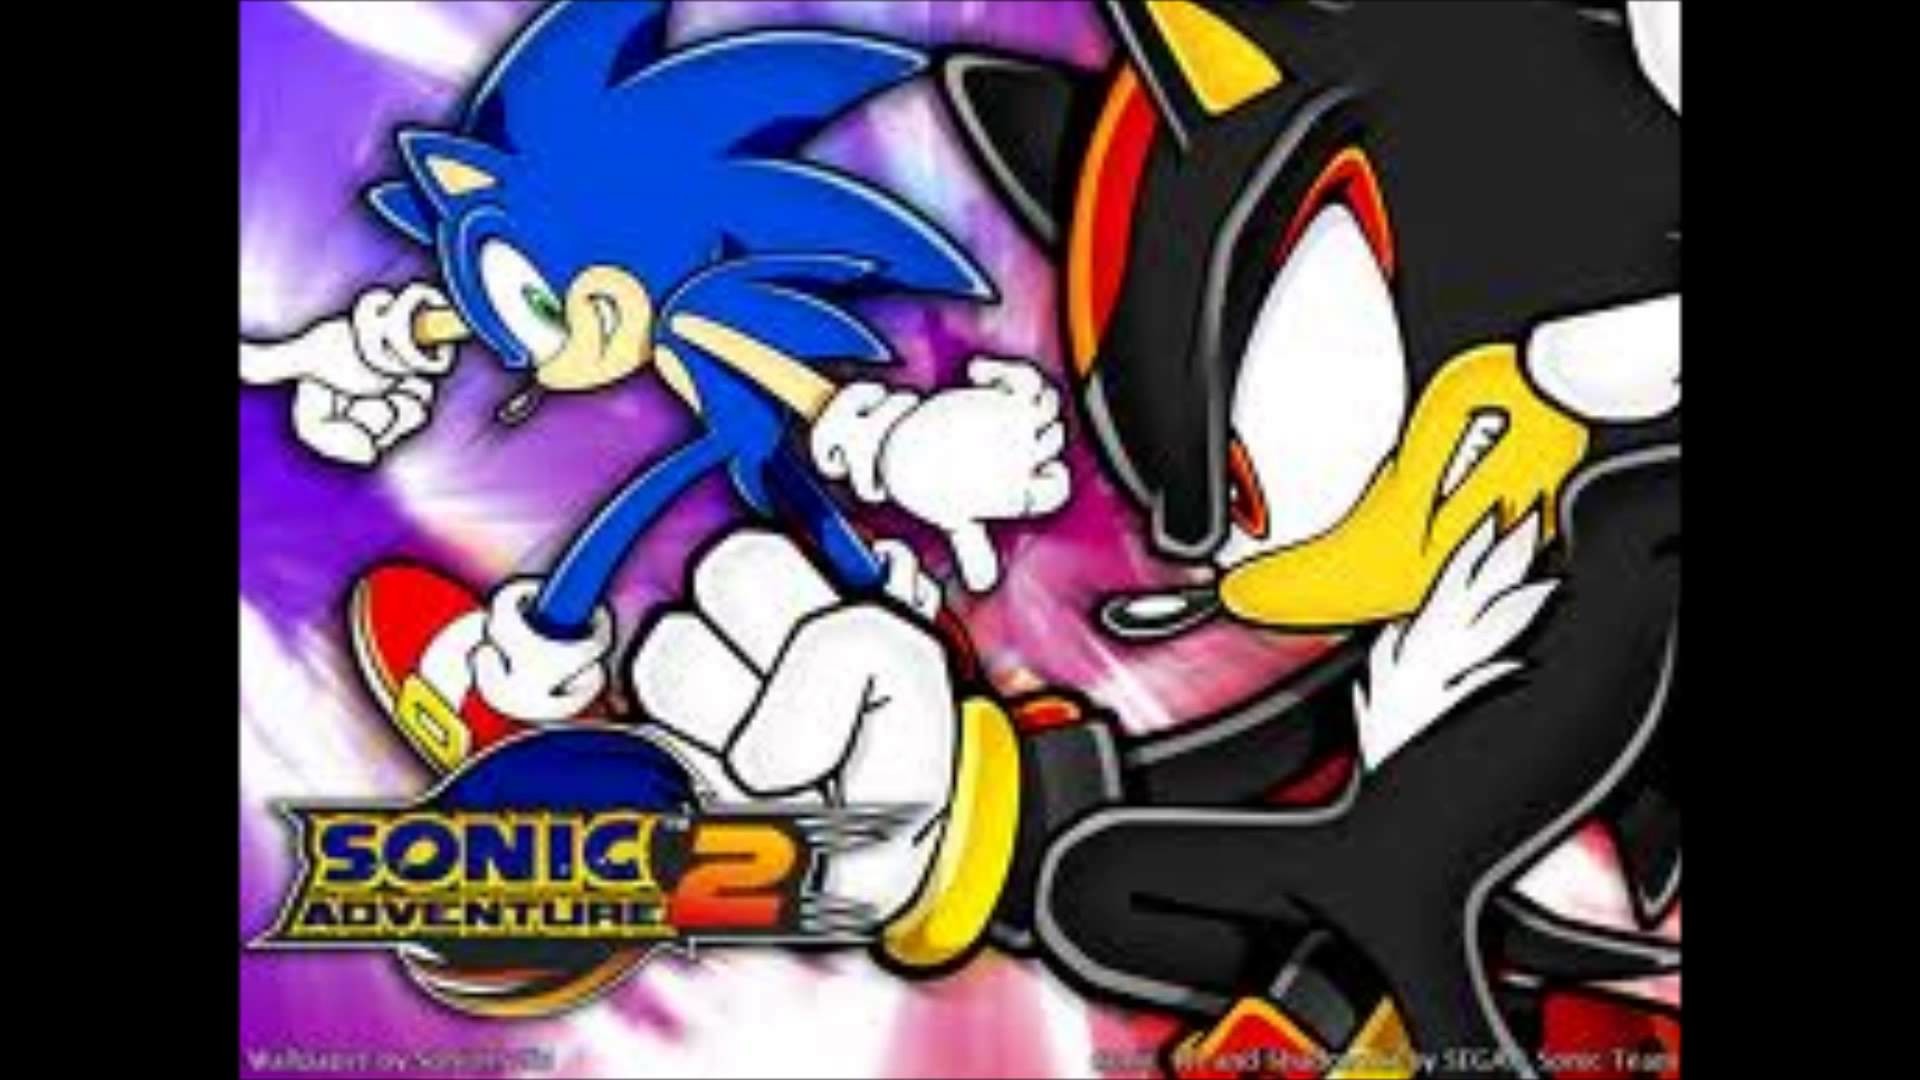 Live and learn sonic. Sonic rouge Sonic Adventure 2. Sonic Adventure 2 OST. Sonic Adventure 2 Original Soundtrack. Live and learn Sonic 3.